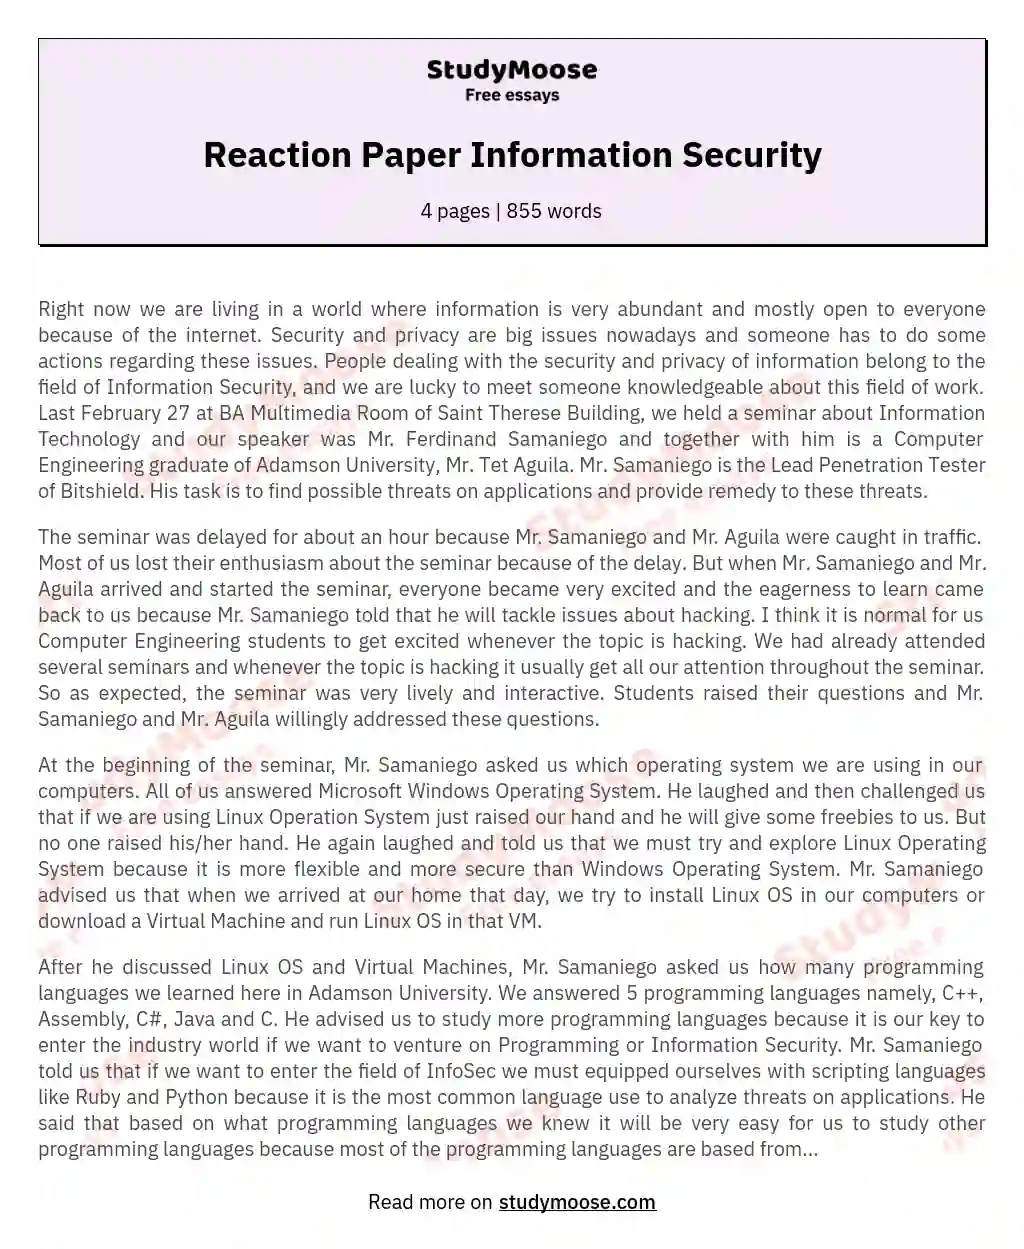 Reaction Paper Information Security